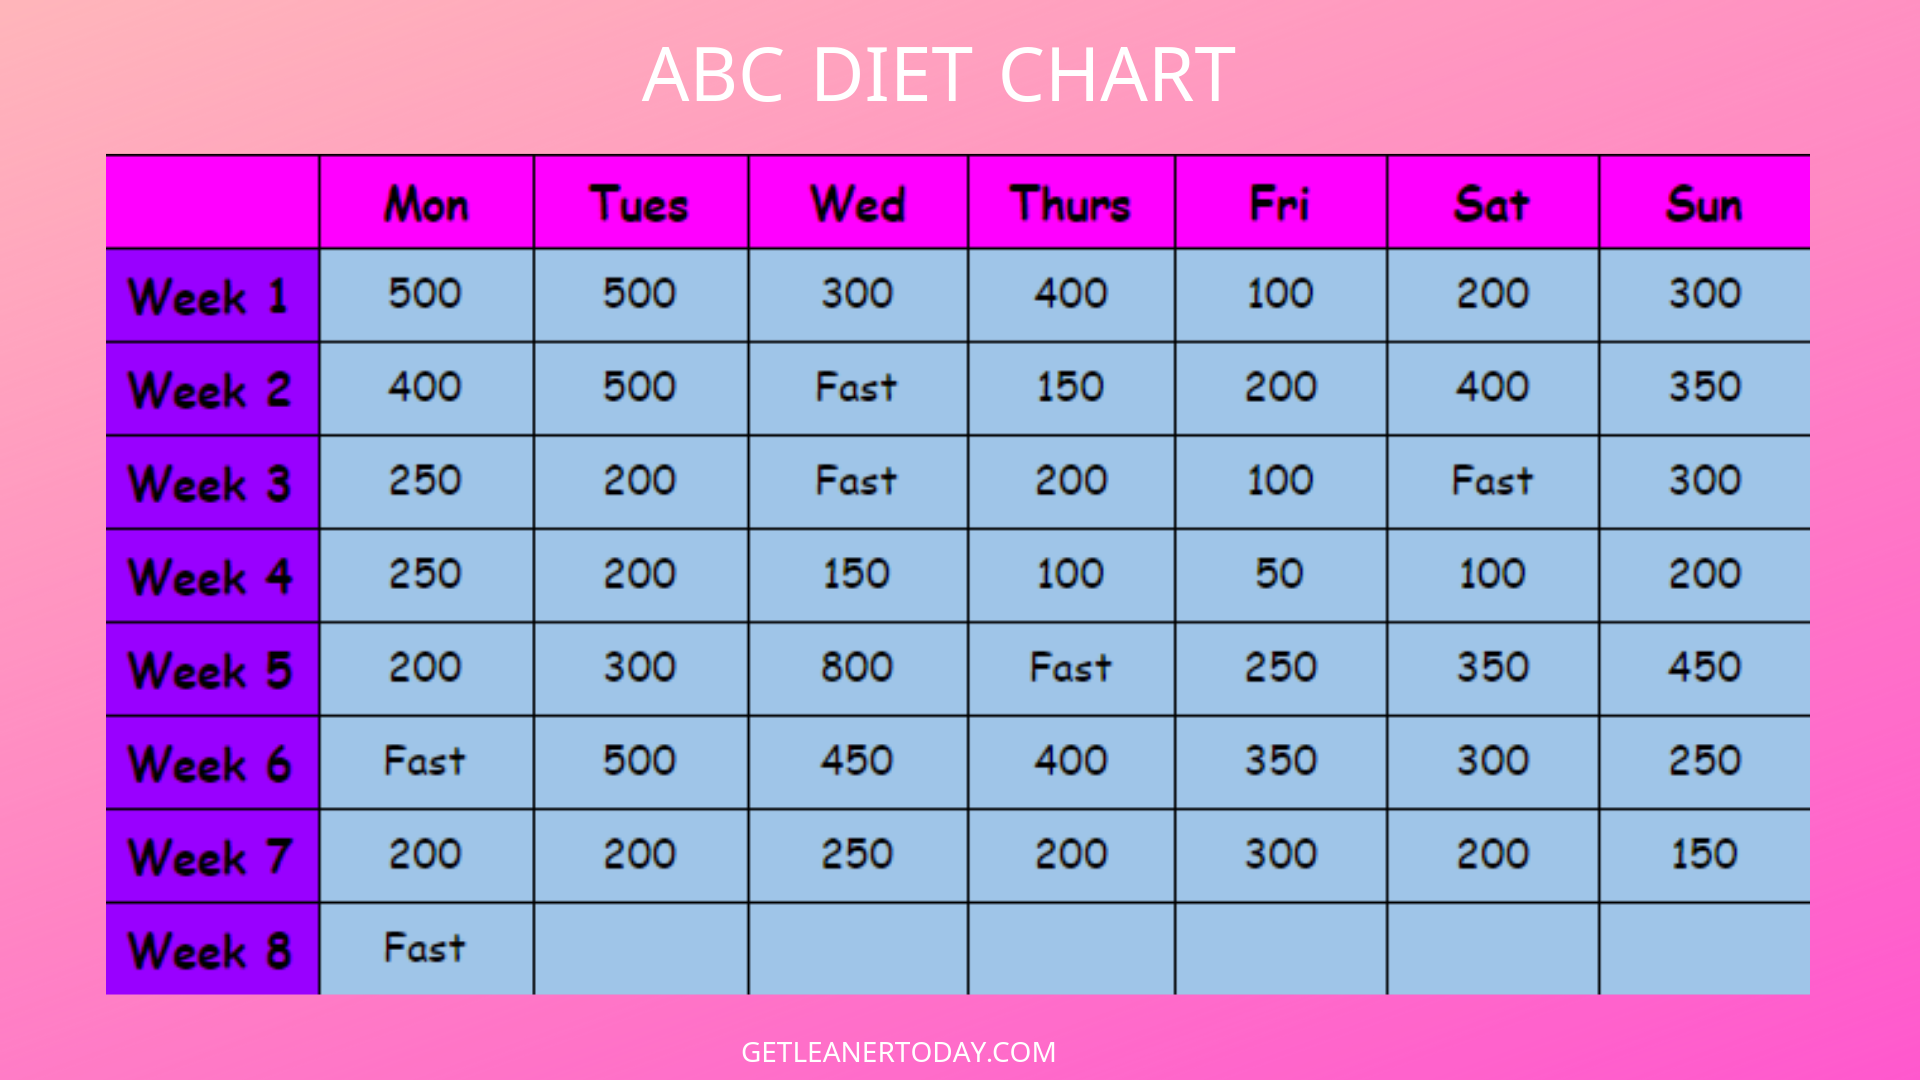 ABC Diet Everything You Need to Know [Including Diet Chart & Cycles]